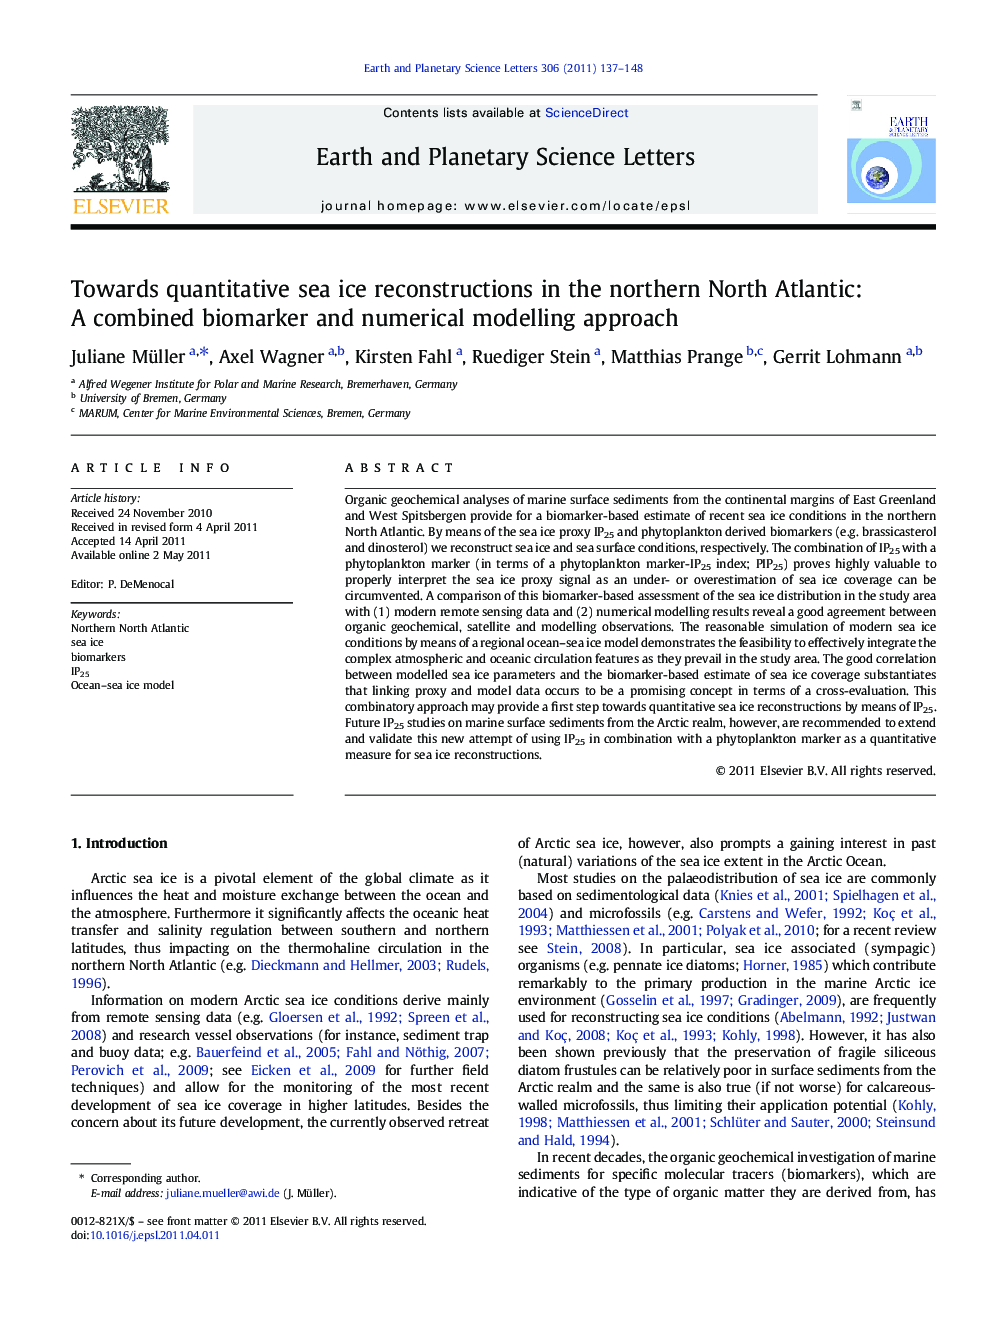 Towards quantitative sea ice reconstructions in the northern North Atlantic: A combined biomarker and numerical modelling approach